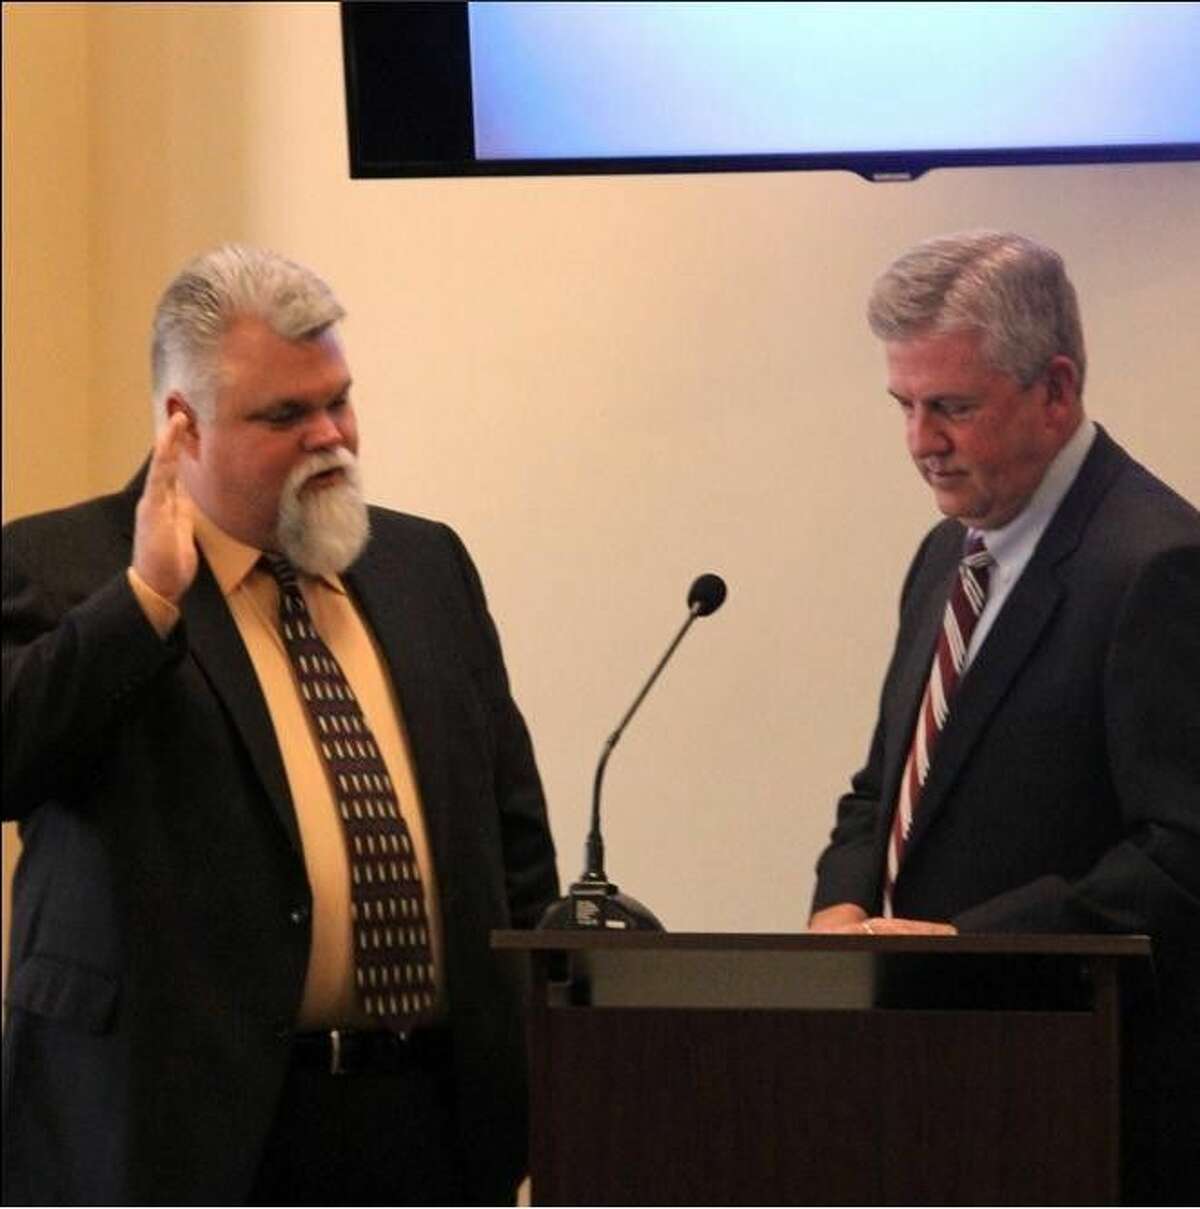 Gregg Hope, left, takes the oath of office from County Judge Craig Doyal as a member of the Lone Star Groundwater Conservation District Board of Directors. He replaces Sam Baker who resigned due to an increased workload.